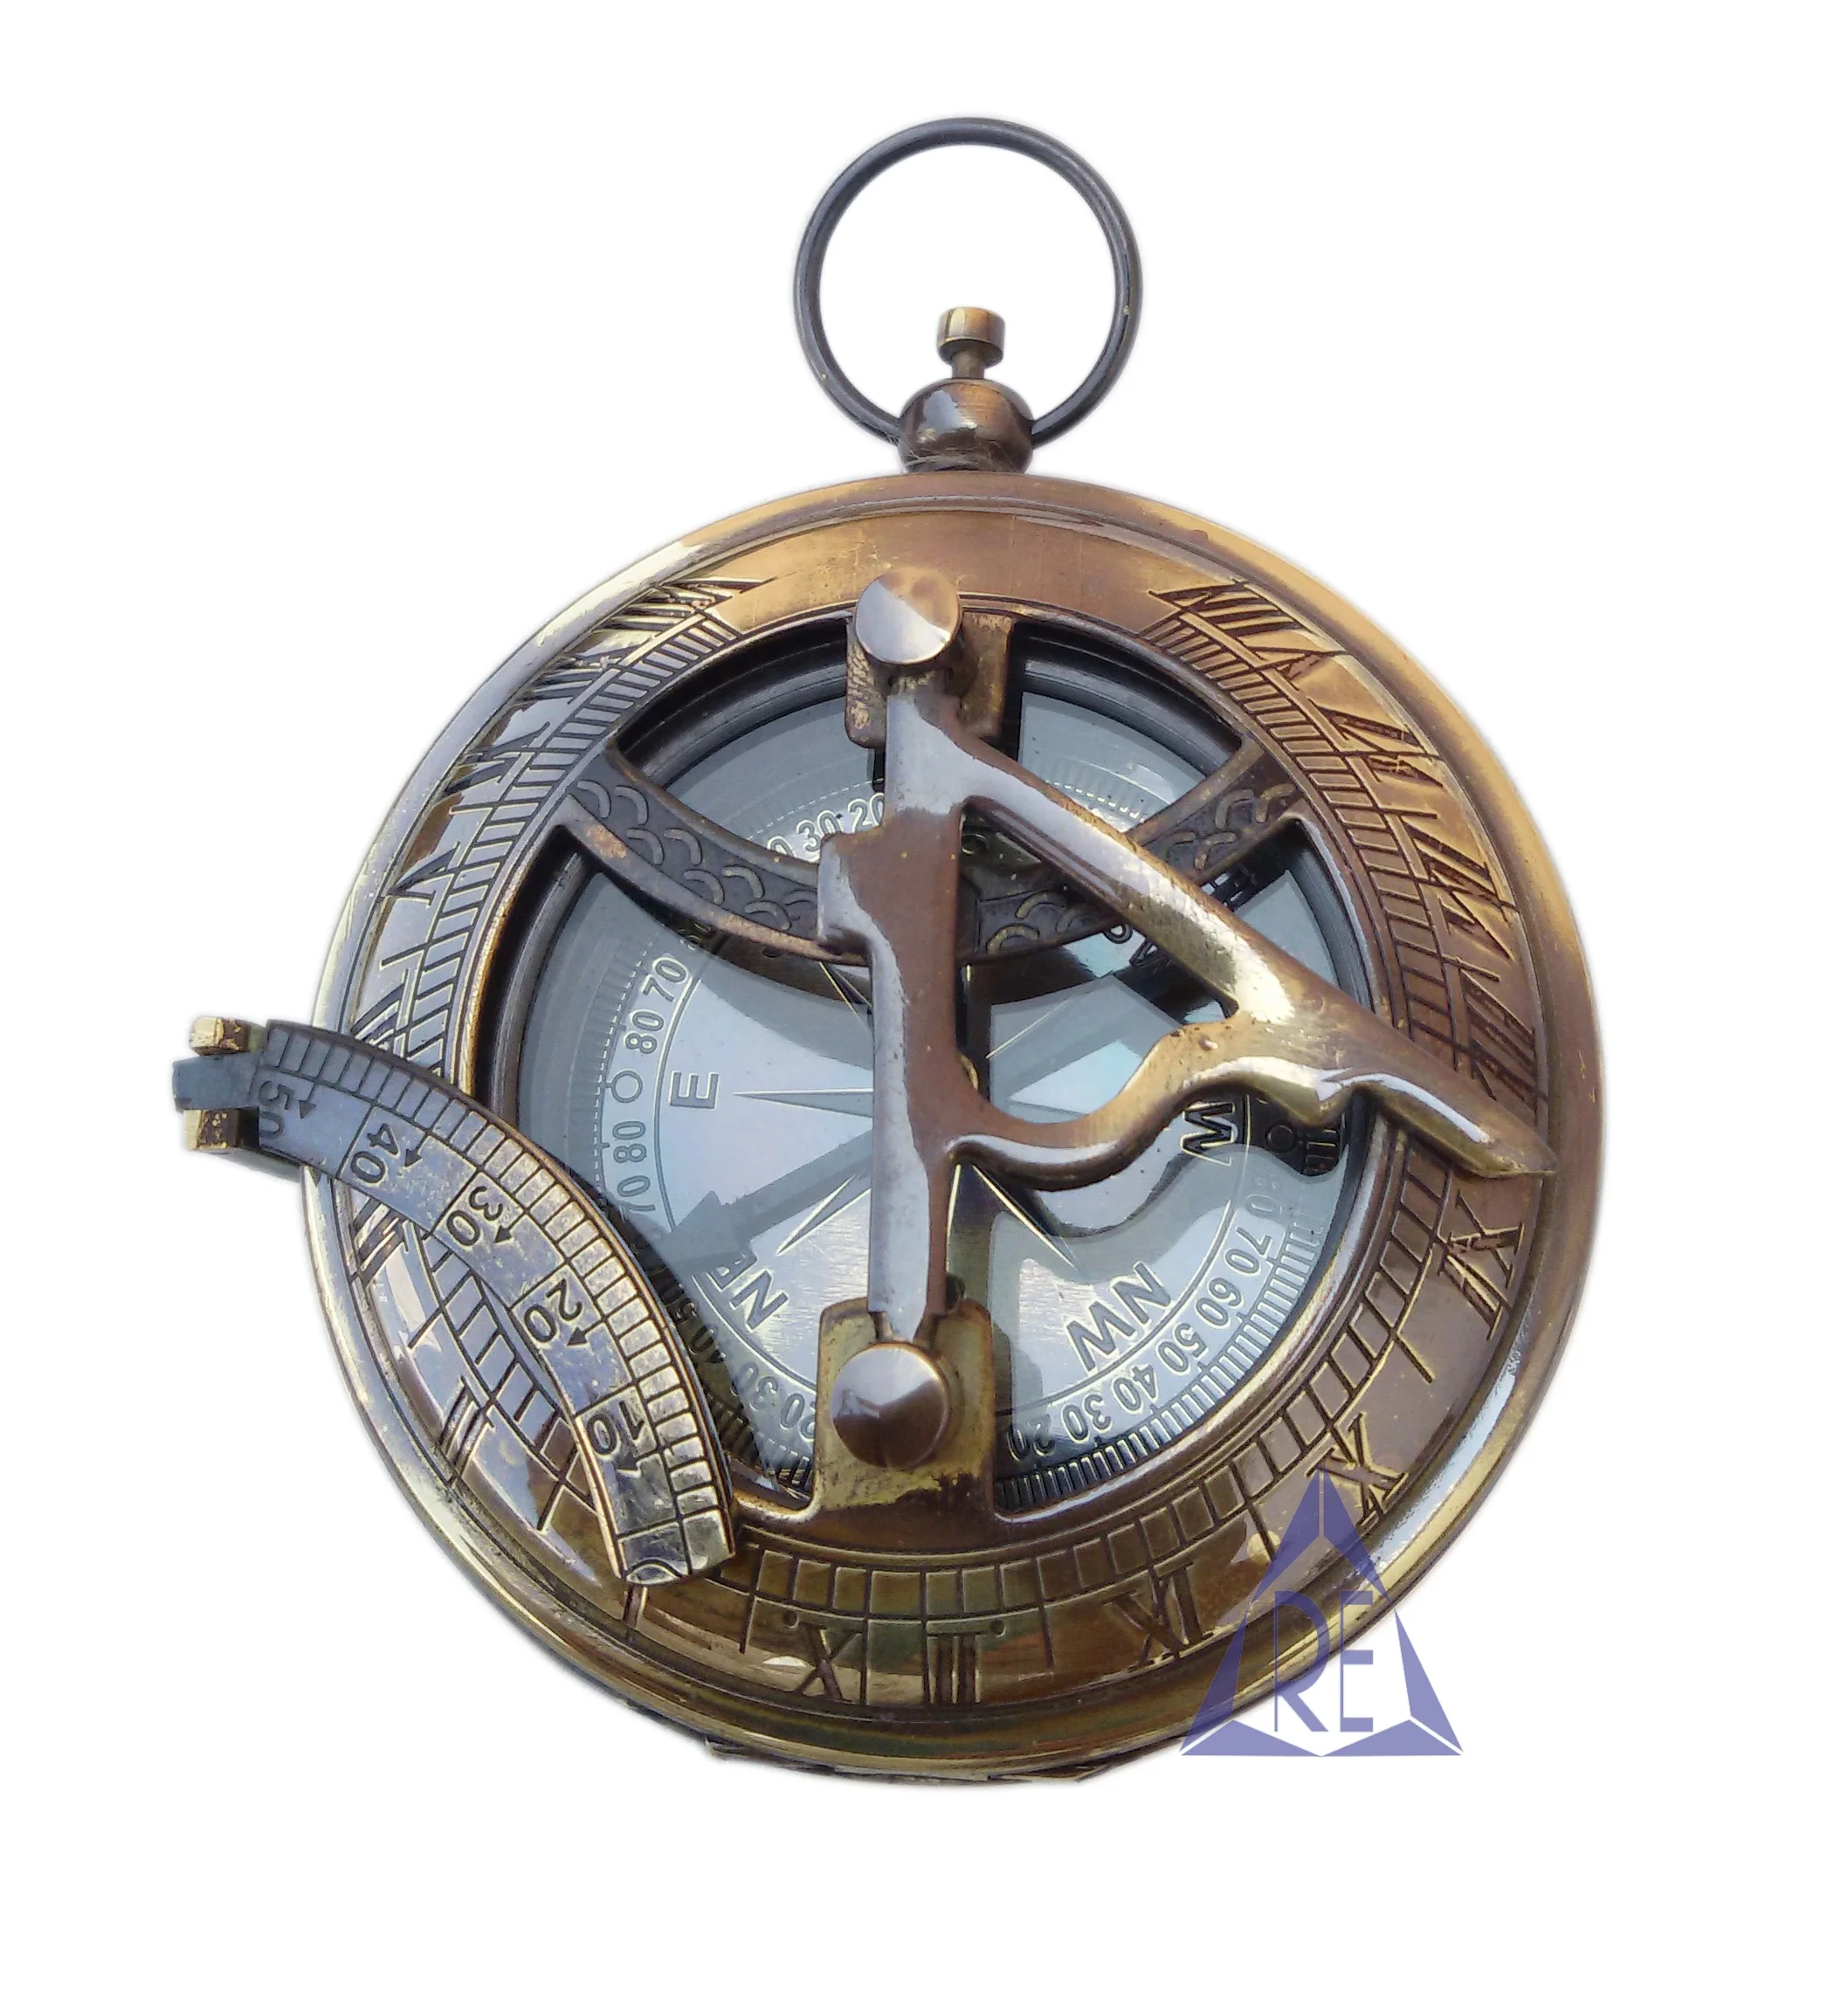 Details about   Brass Marine Nautical Pocket Sundial Push Button Compass New Year Gift 